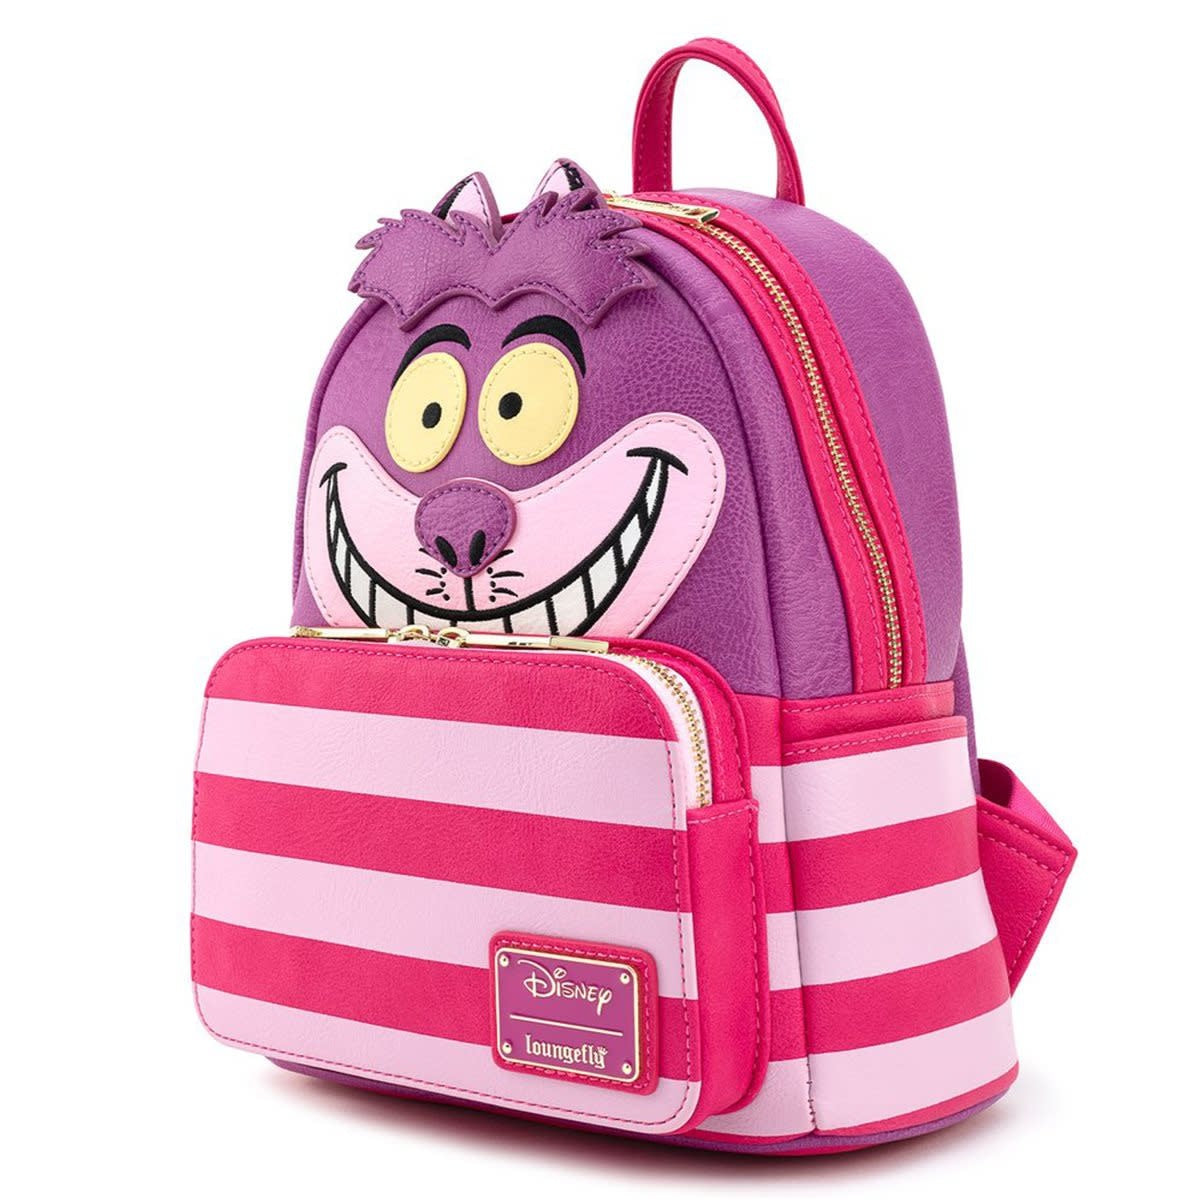 Loungefly Cheshire Cat Mini Backpack